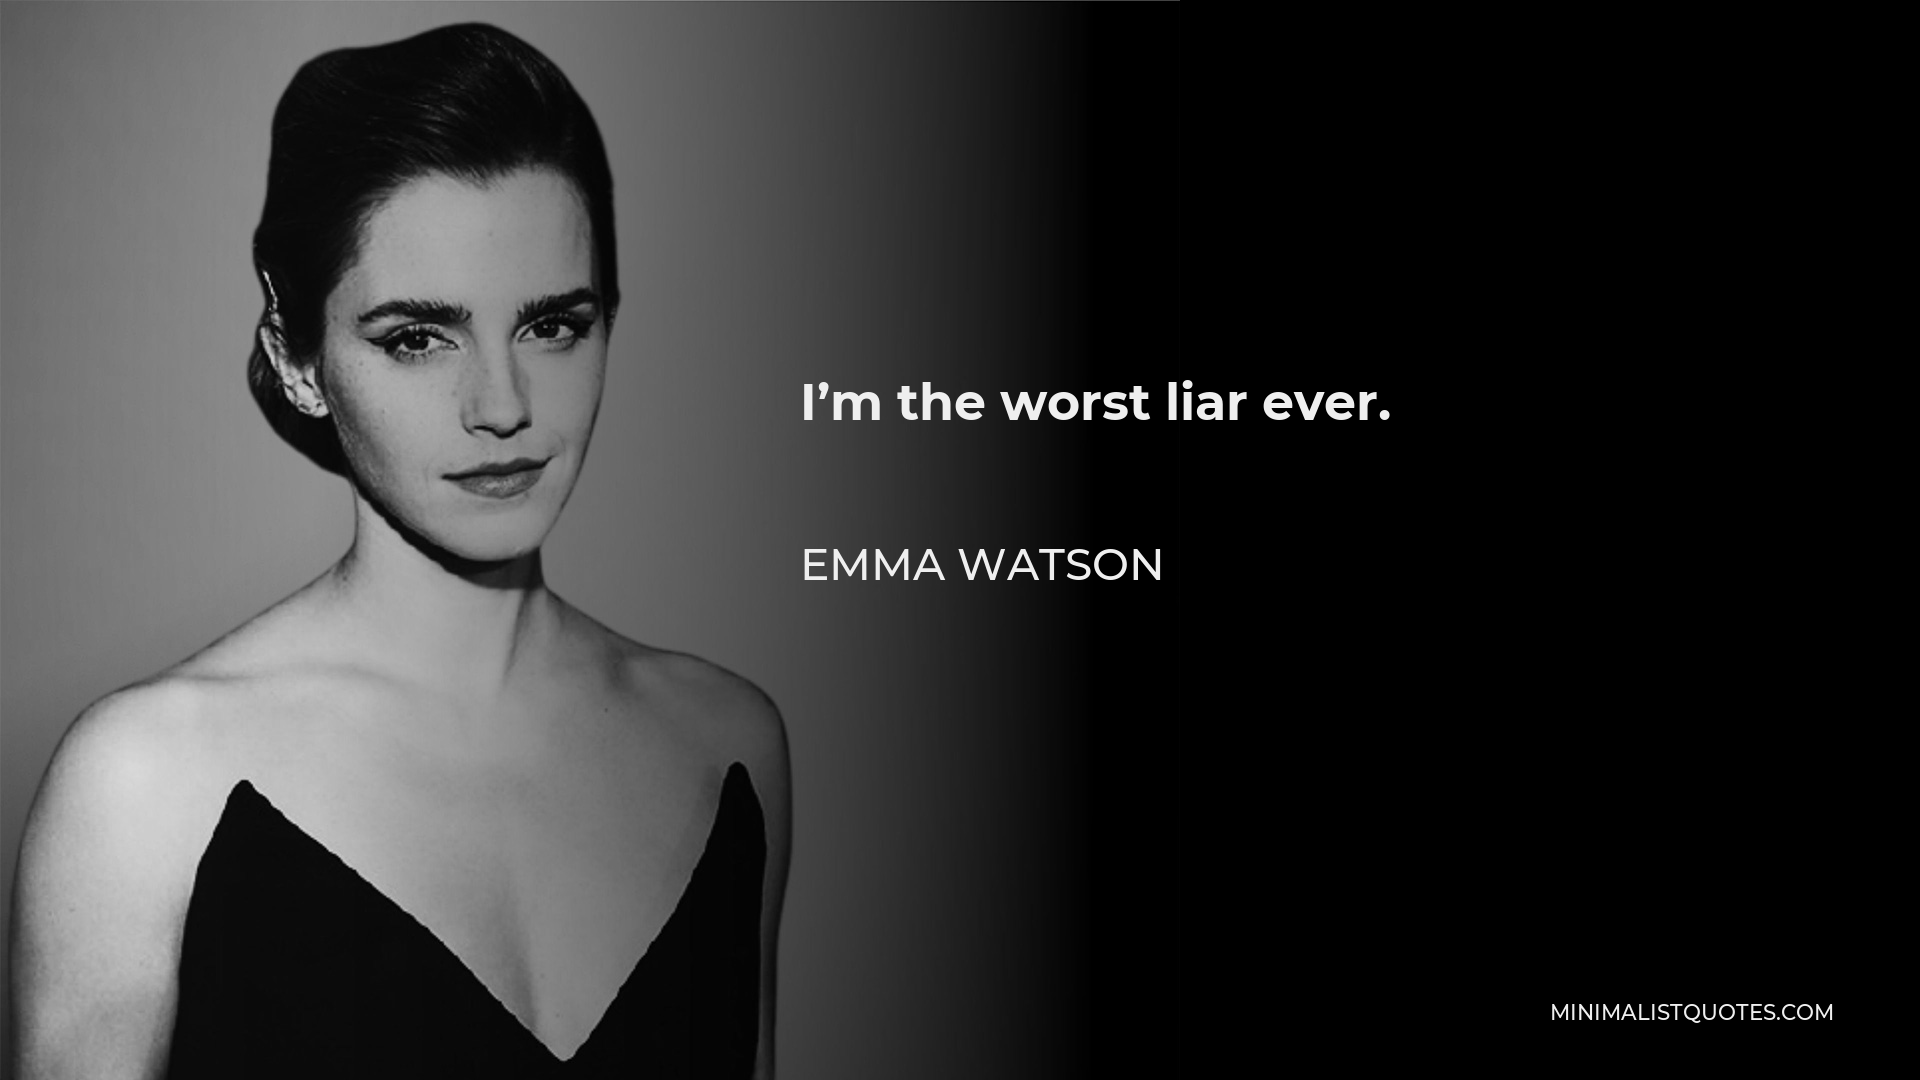 Emma Watson Quote - I’m the worst liar ever.